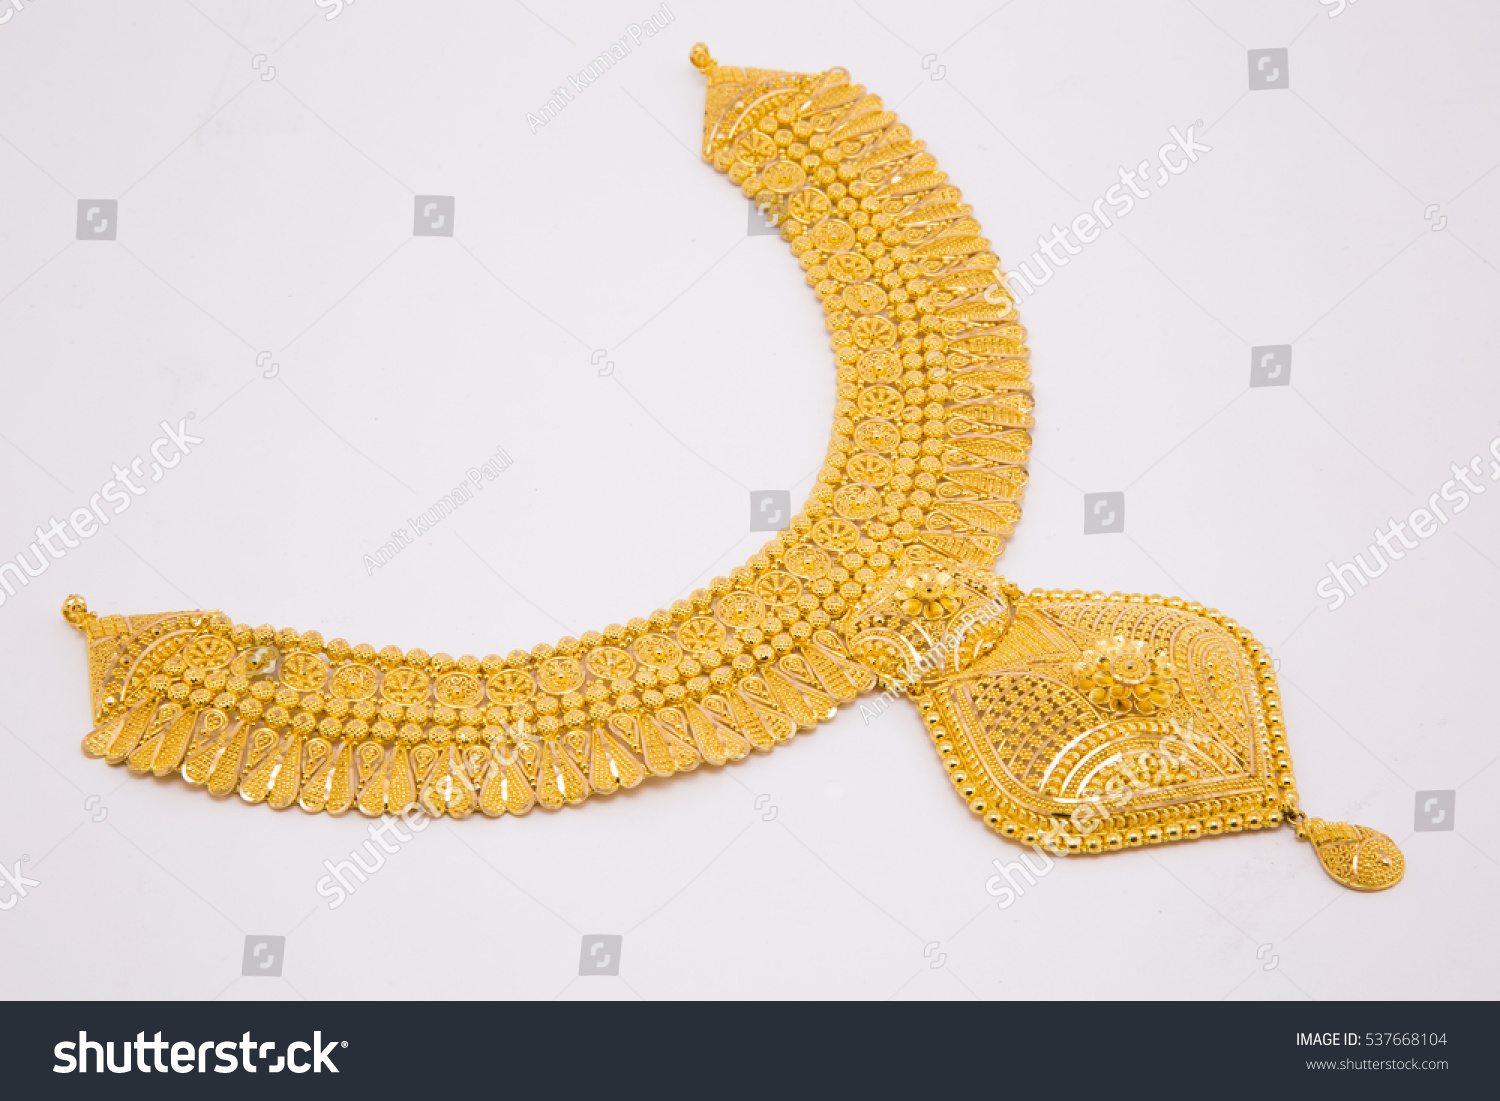 Beautiful gold neckless isolated on black background. Gold jewellery stock photo. #537668104